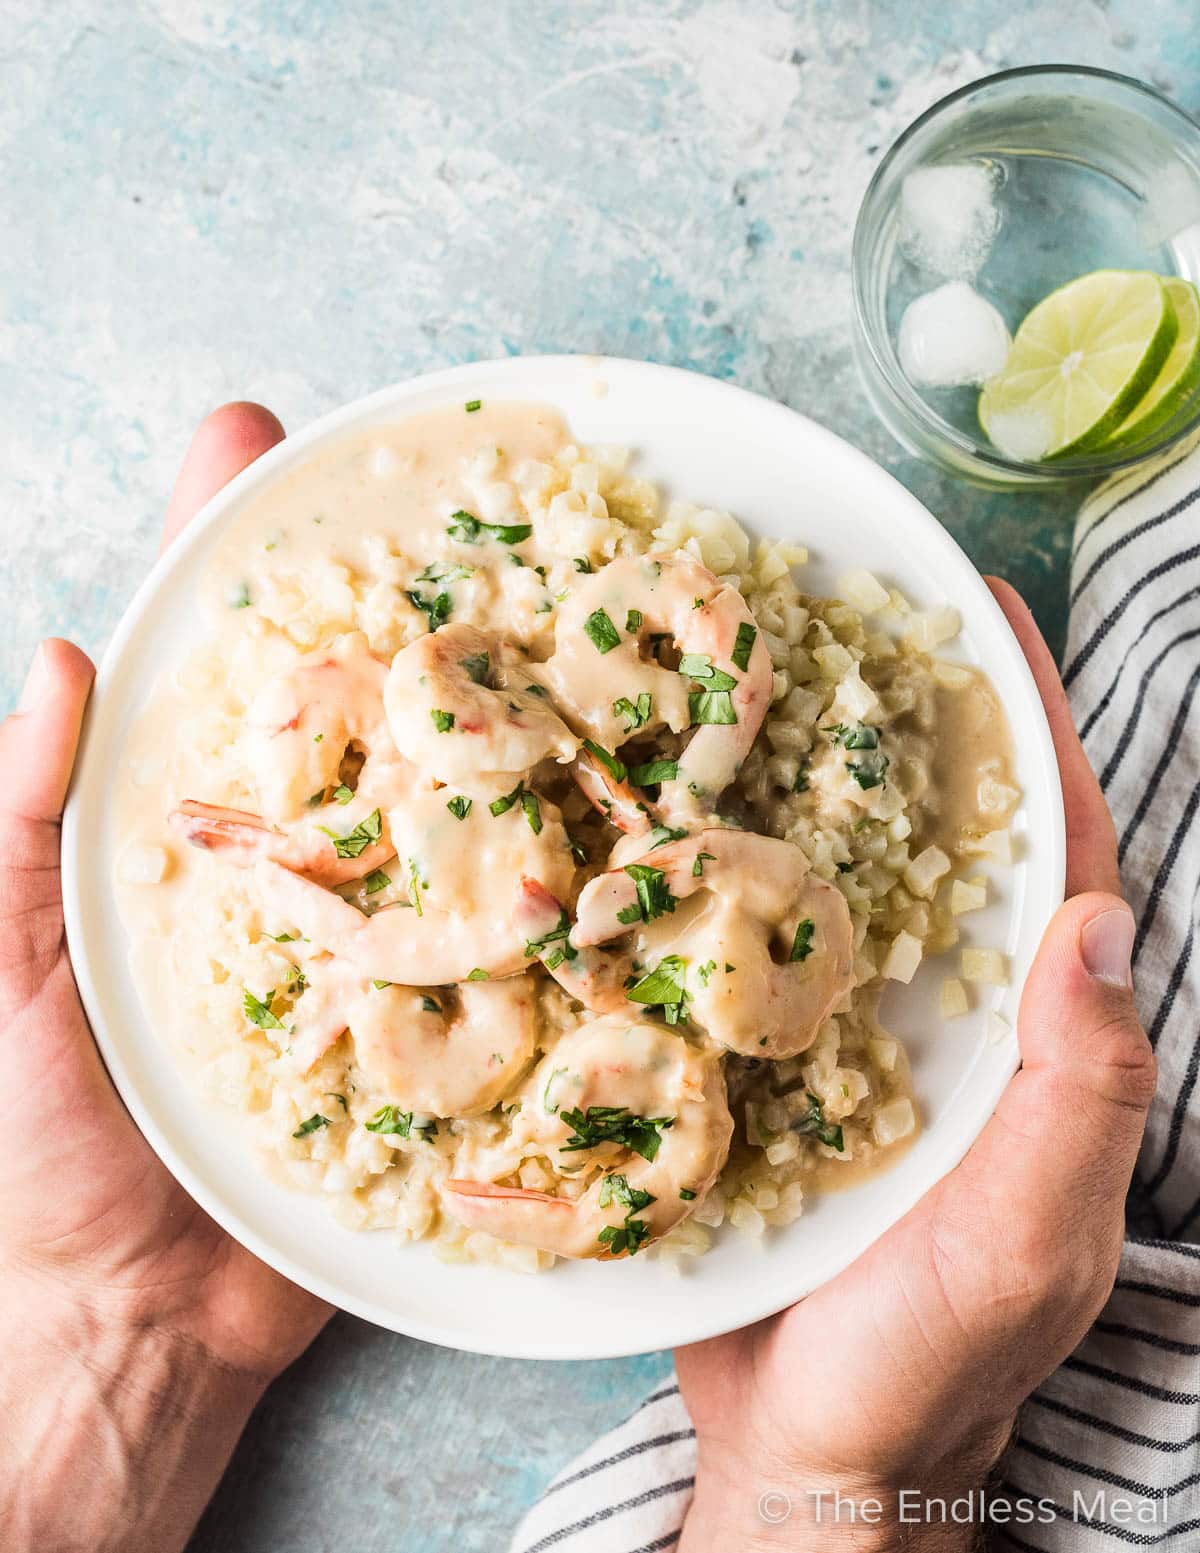 Hands holding a plate of coconut lime shrimp with cauliflower rice.